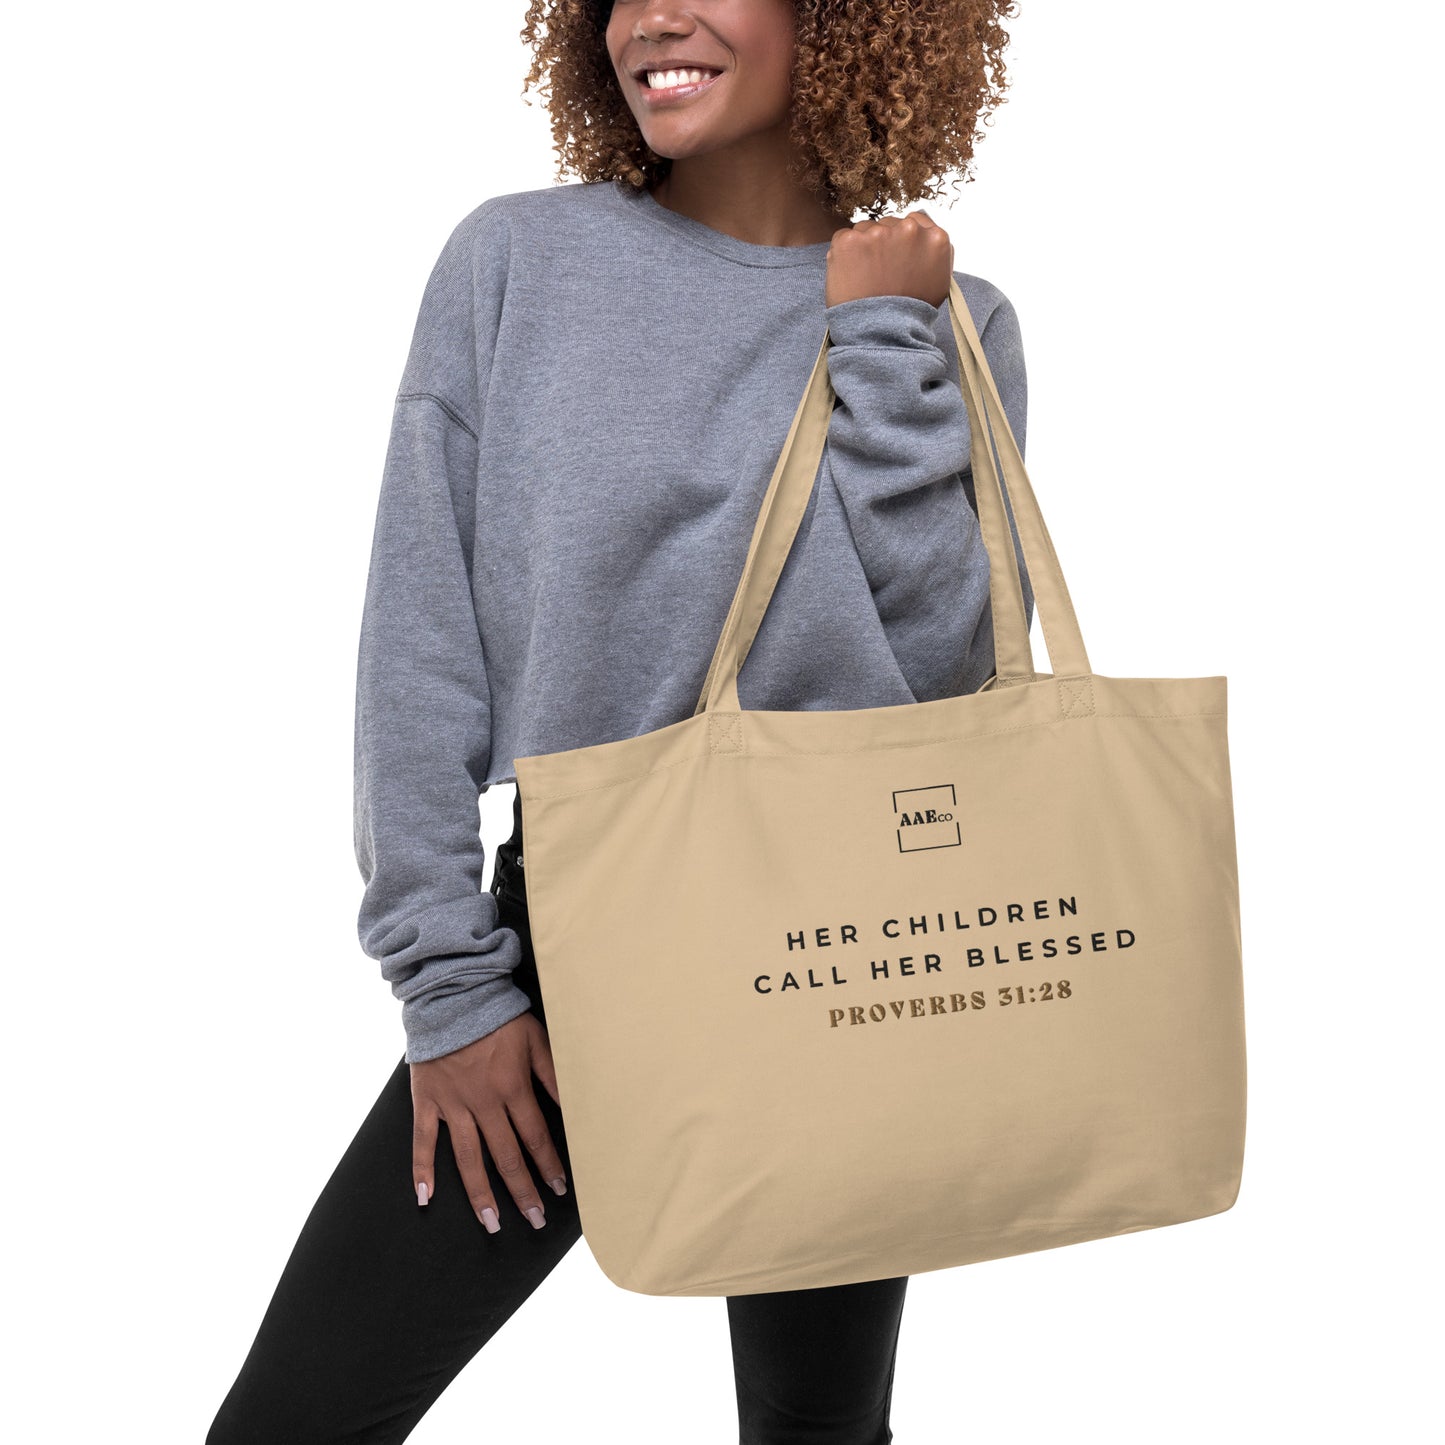 Proverbs 31:28 Tote (Beige)